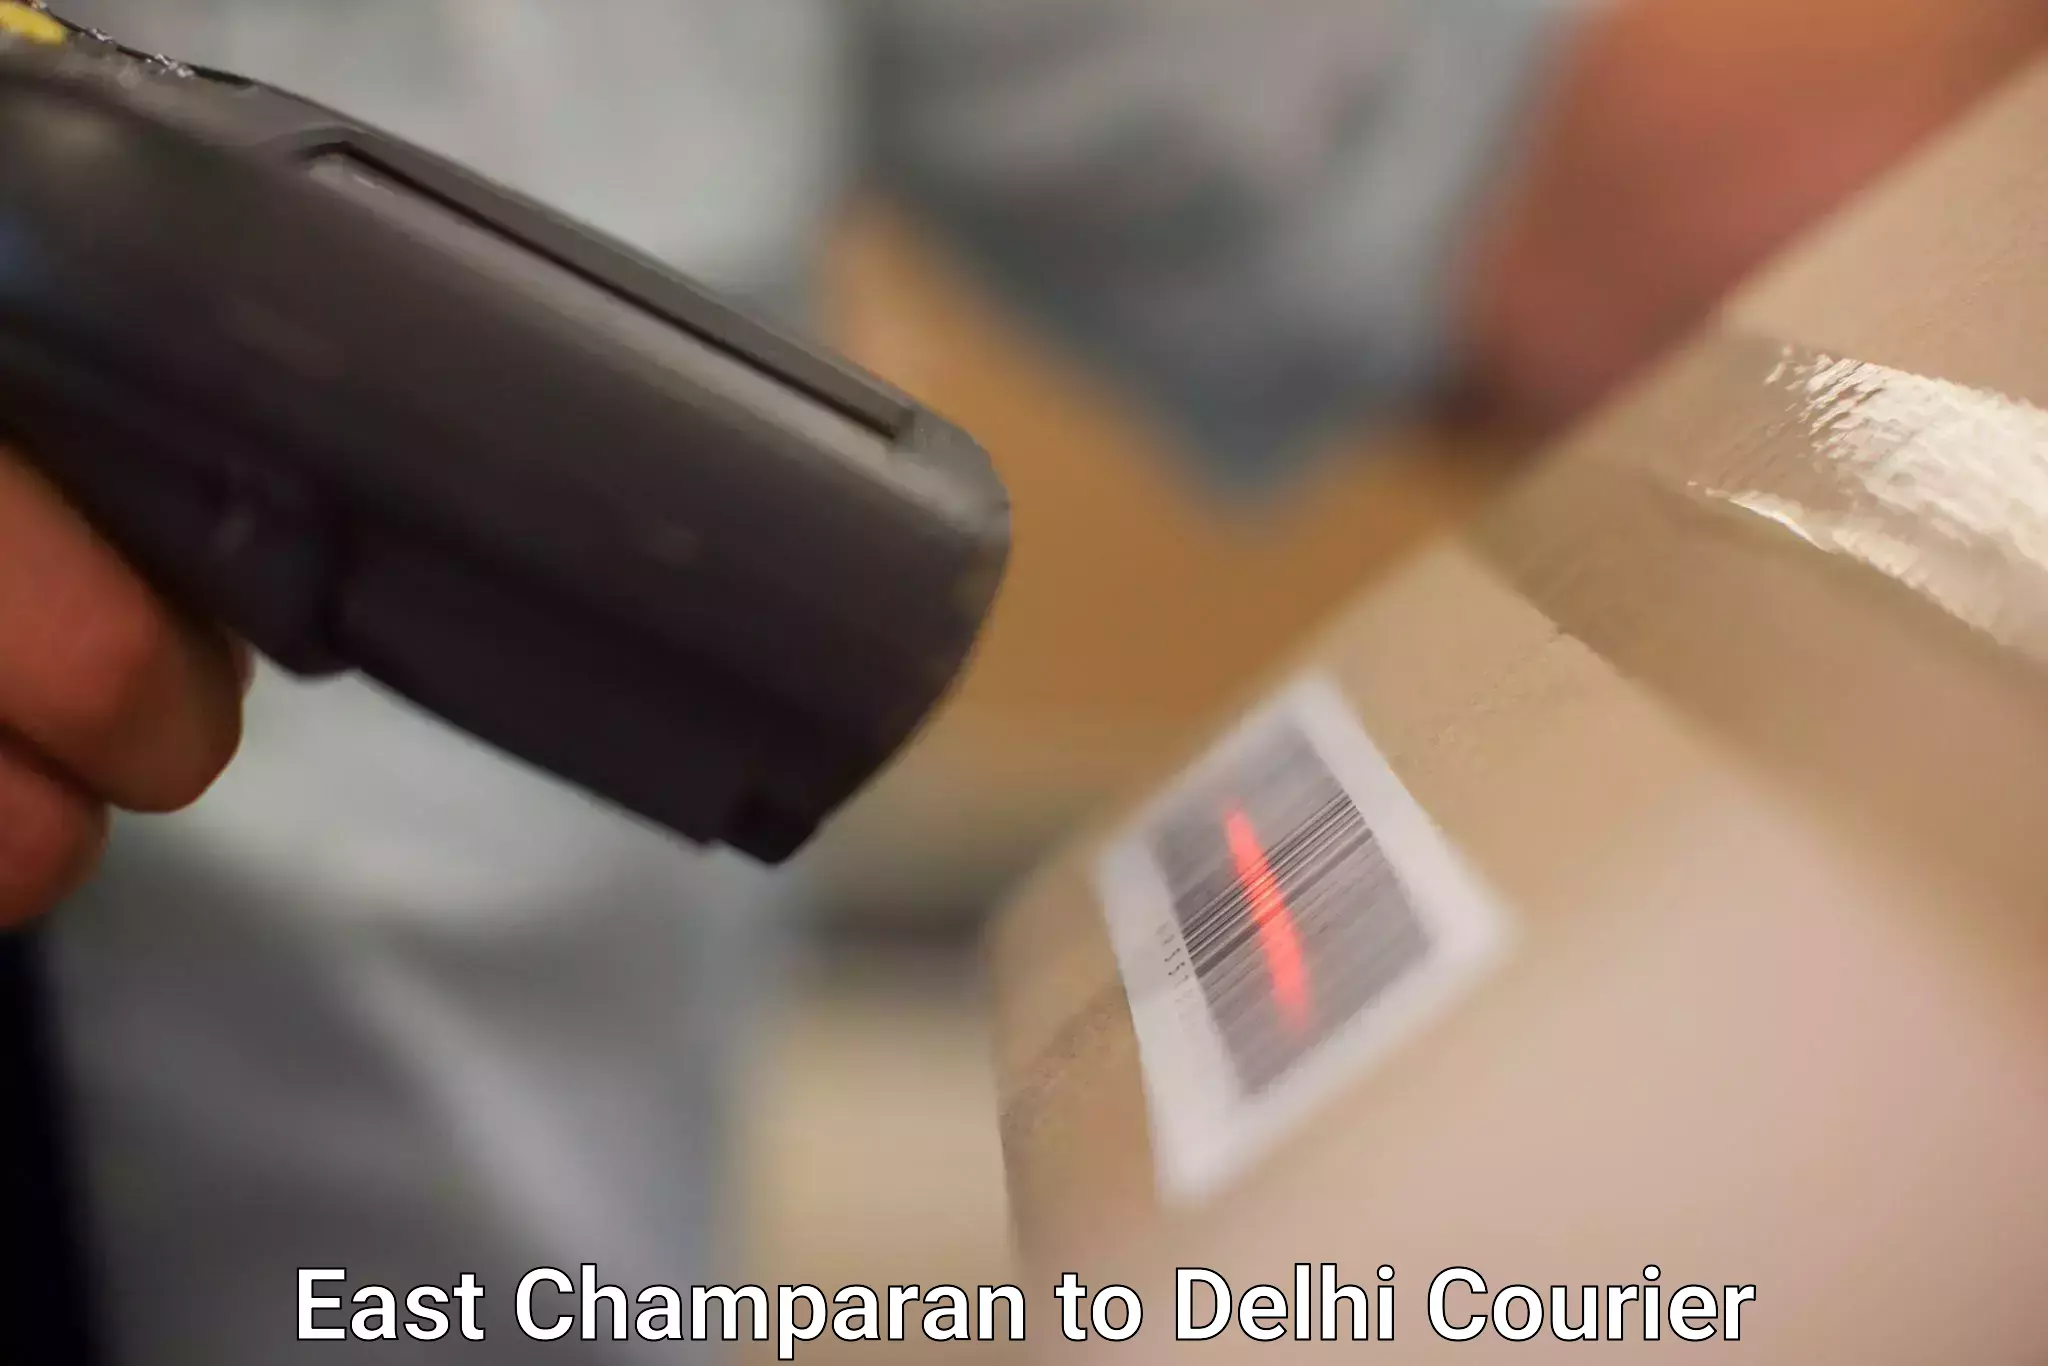 On-demand shipping options East Champaran to East Delhi